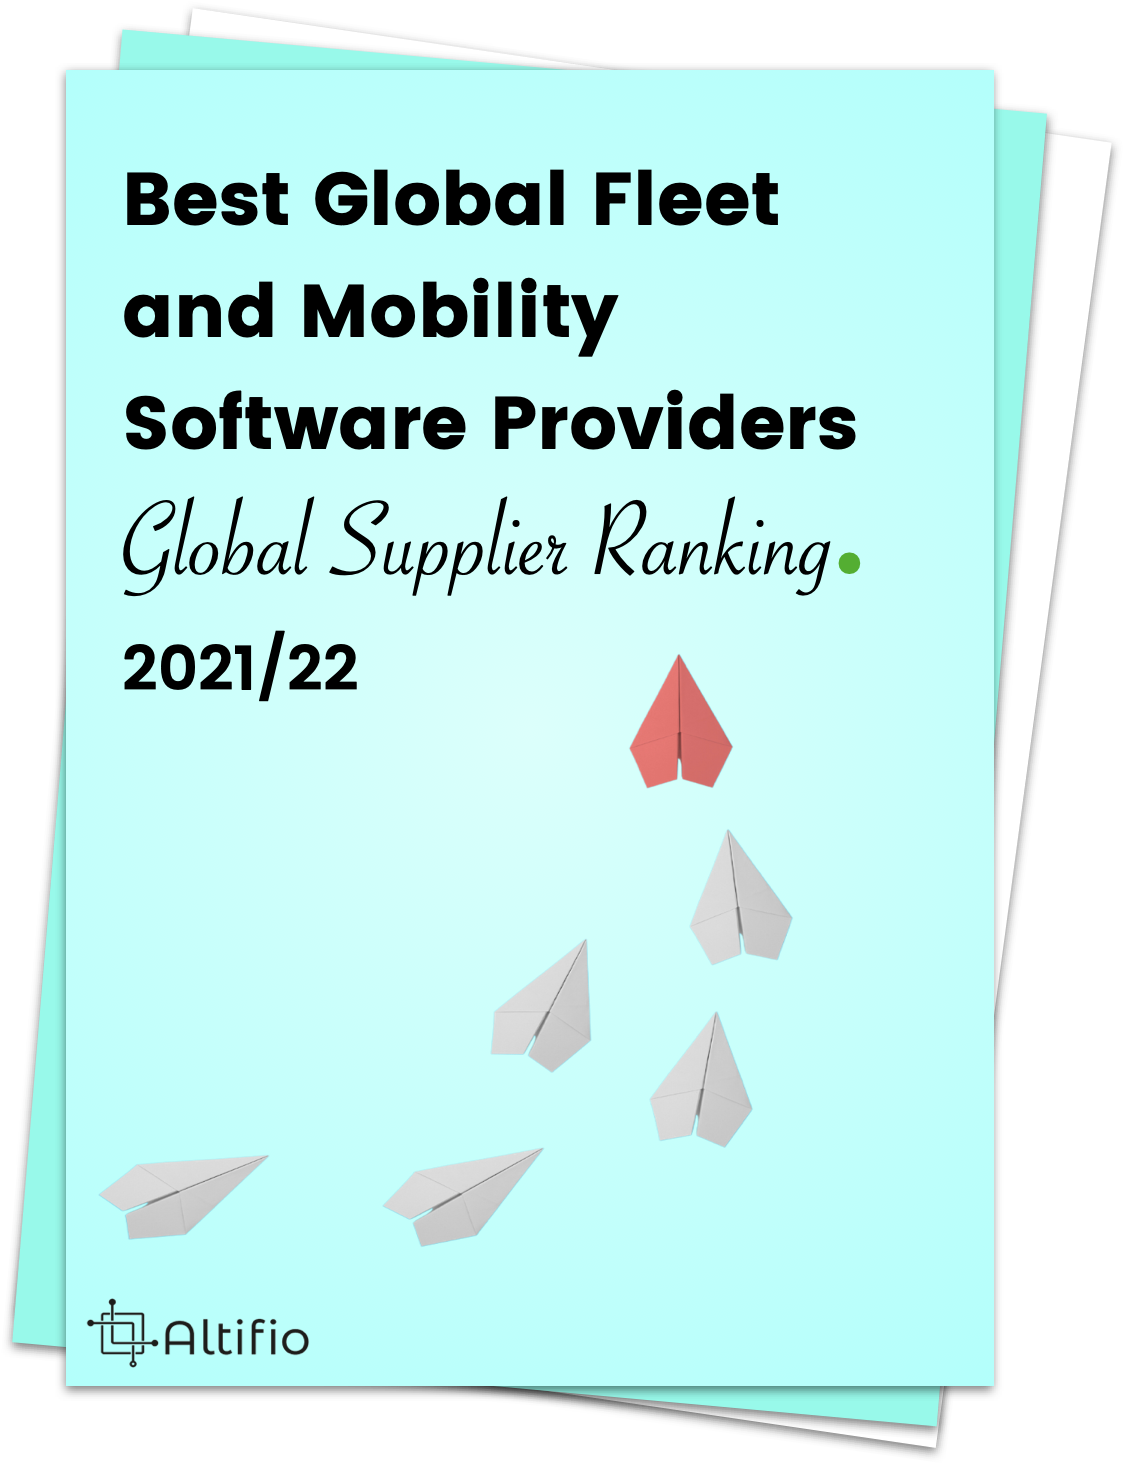 Best Global Fleet and Mobility Software Providers Global Supplier Ranking. 2021/22